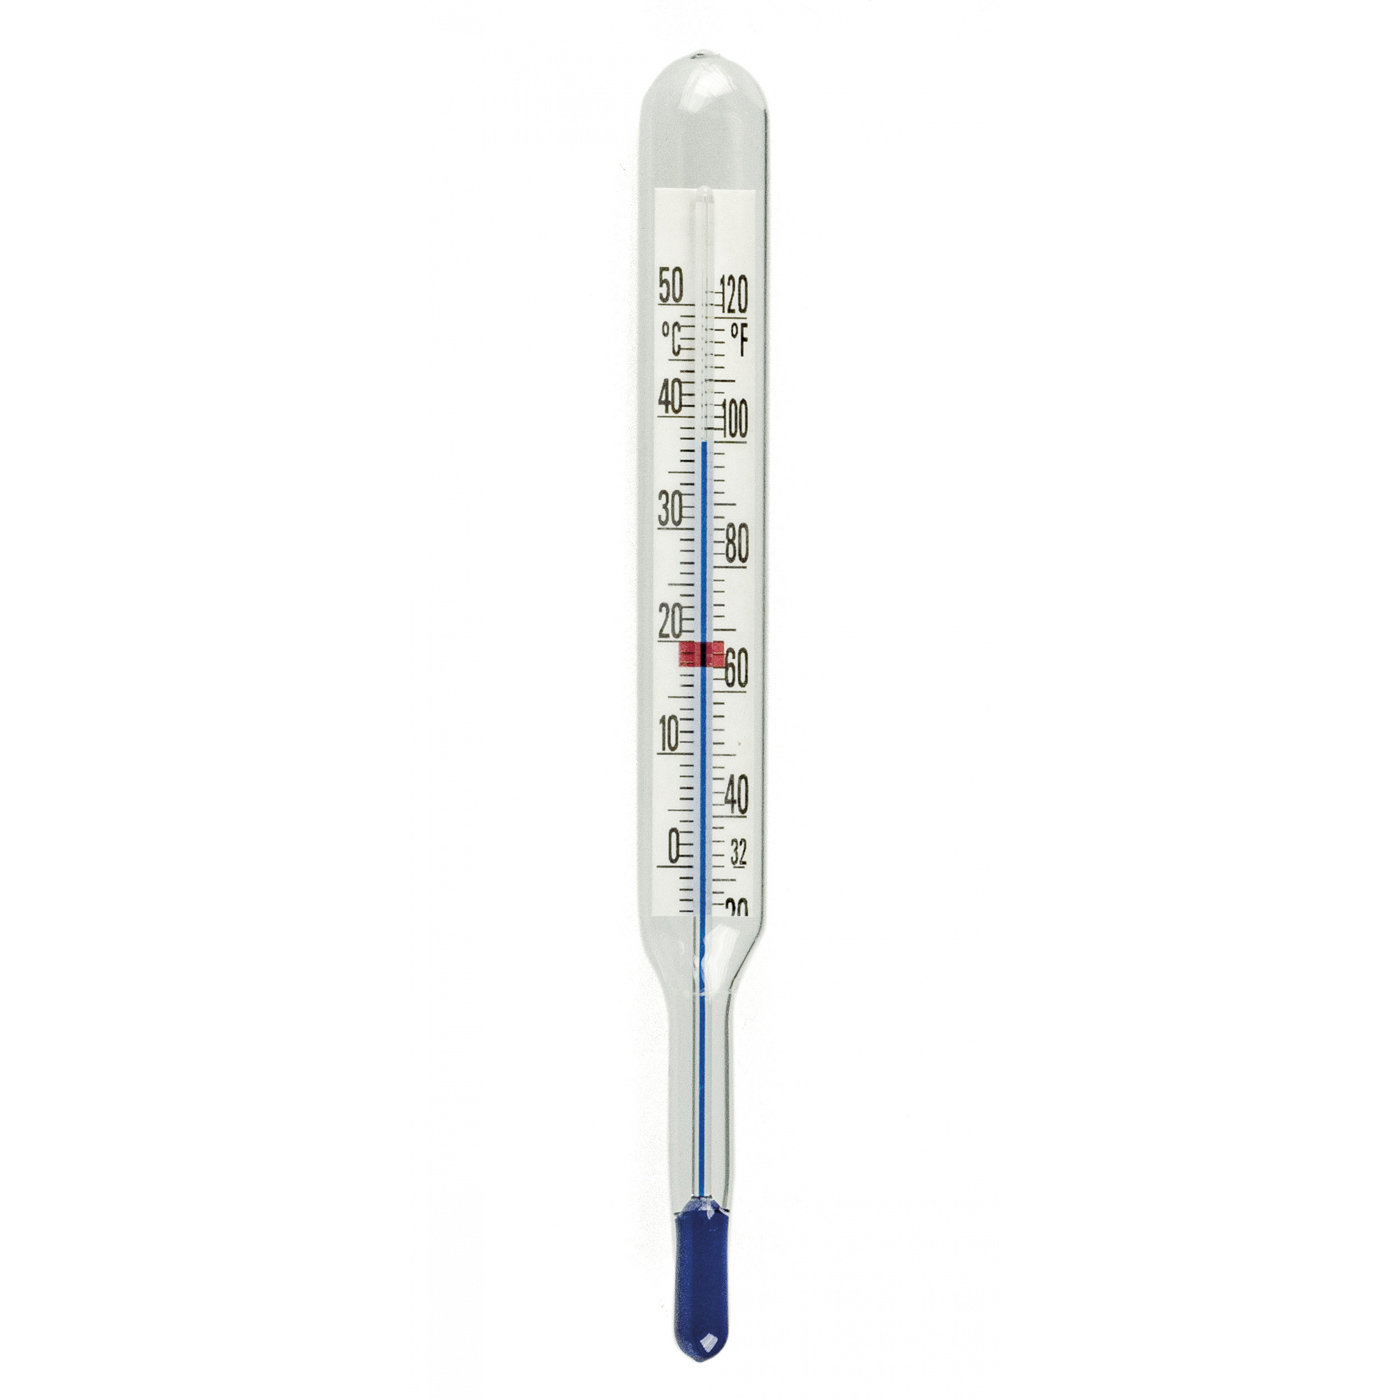 Kaiser Dosen-Thermometer, Labor-Thermometer